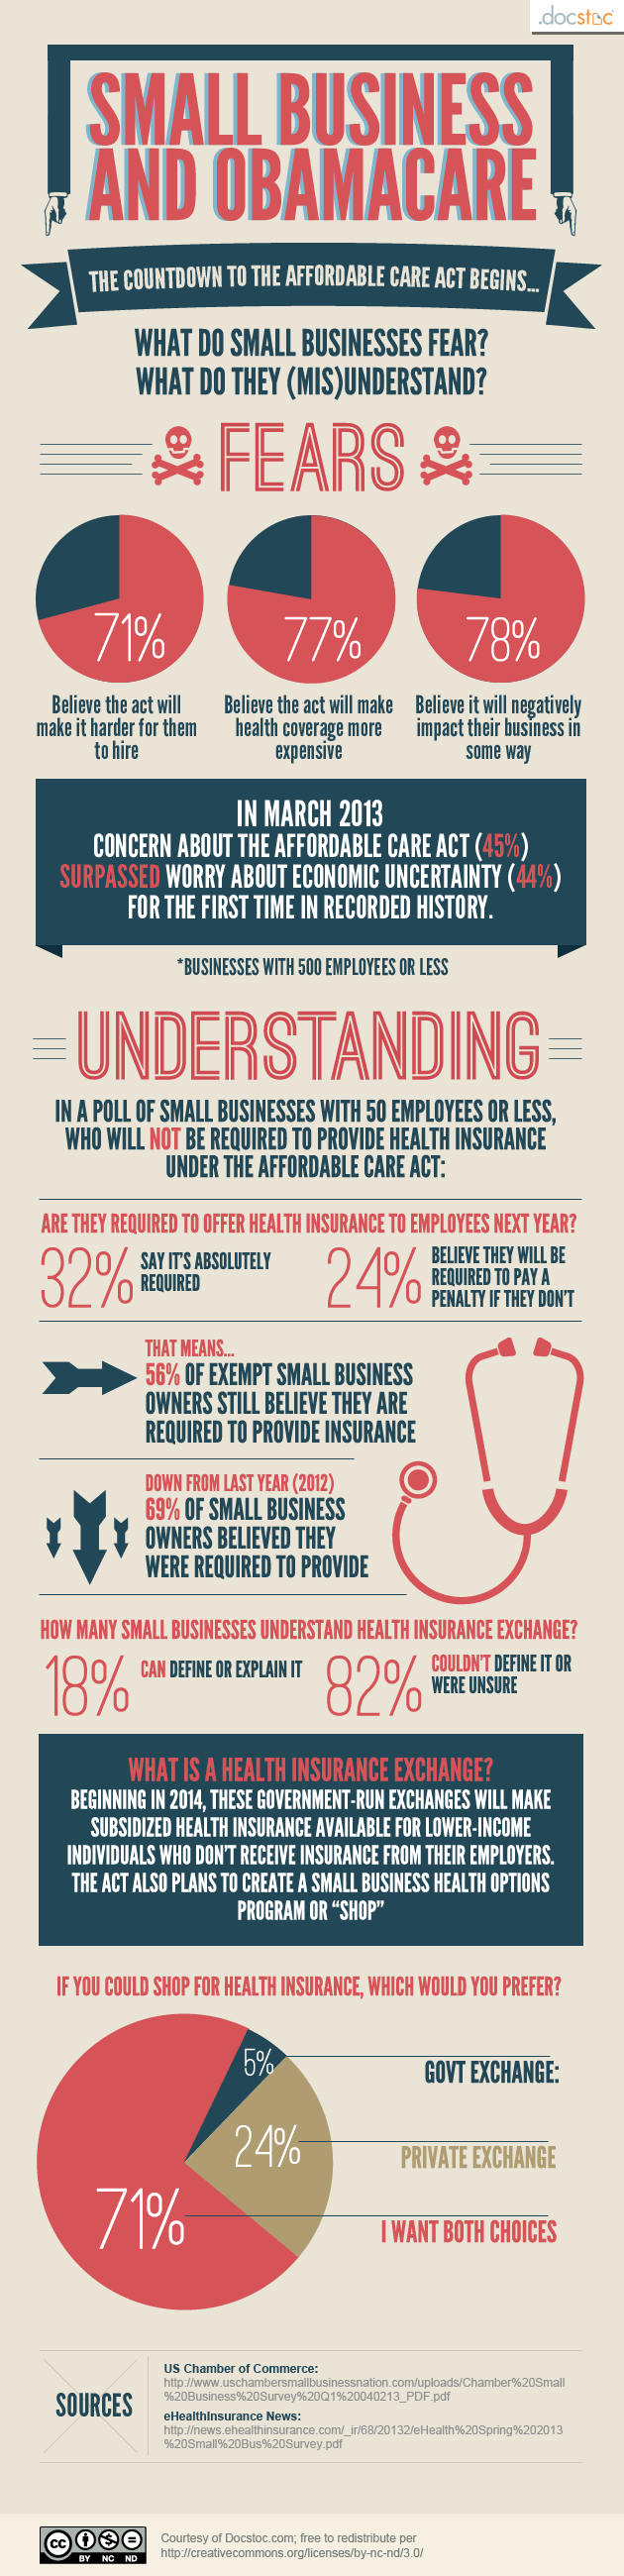 Small Business and Obamacare: Confusion and Concerns Infographic